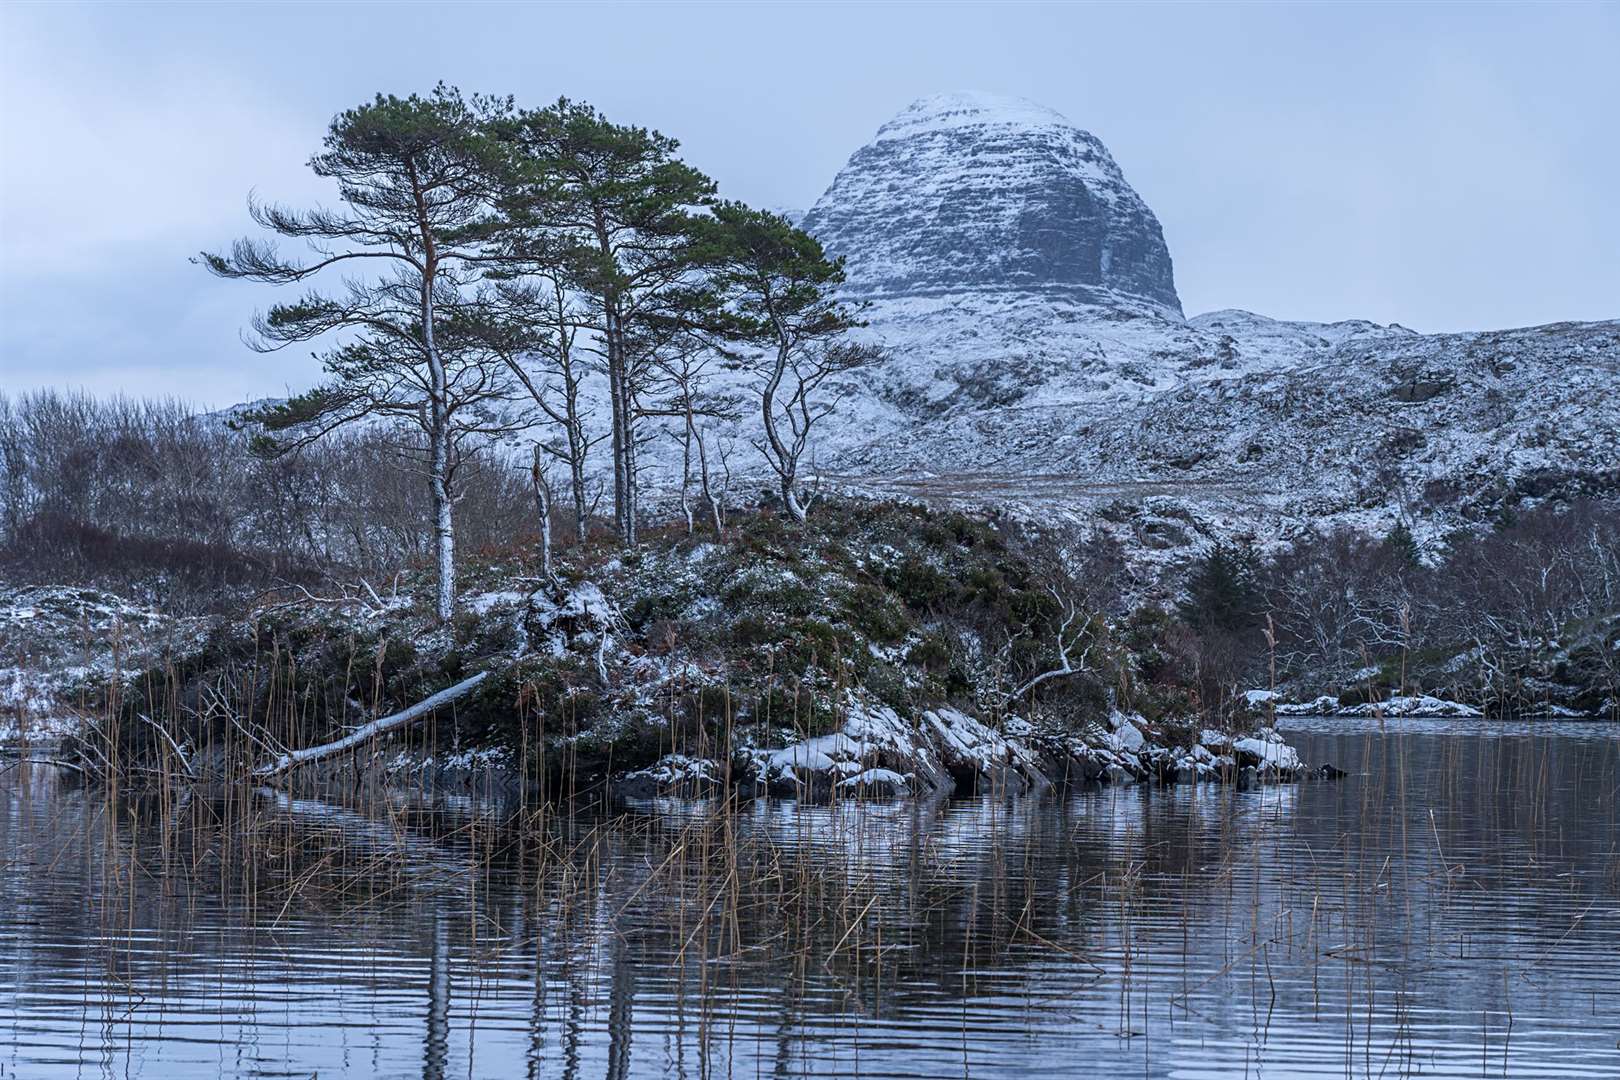 Another view of Suilven from Glencanisp. Photo: Chris Puddlephatt